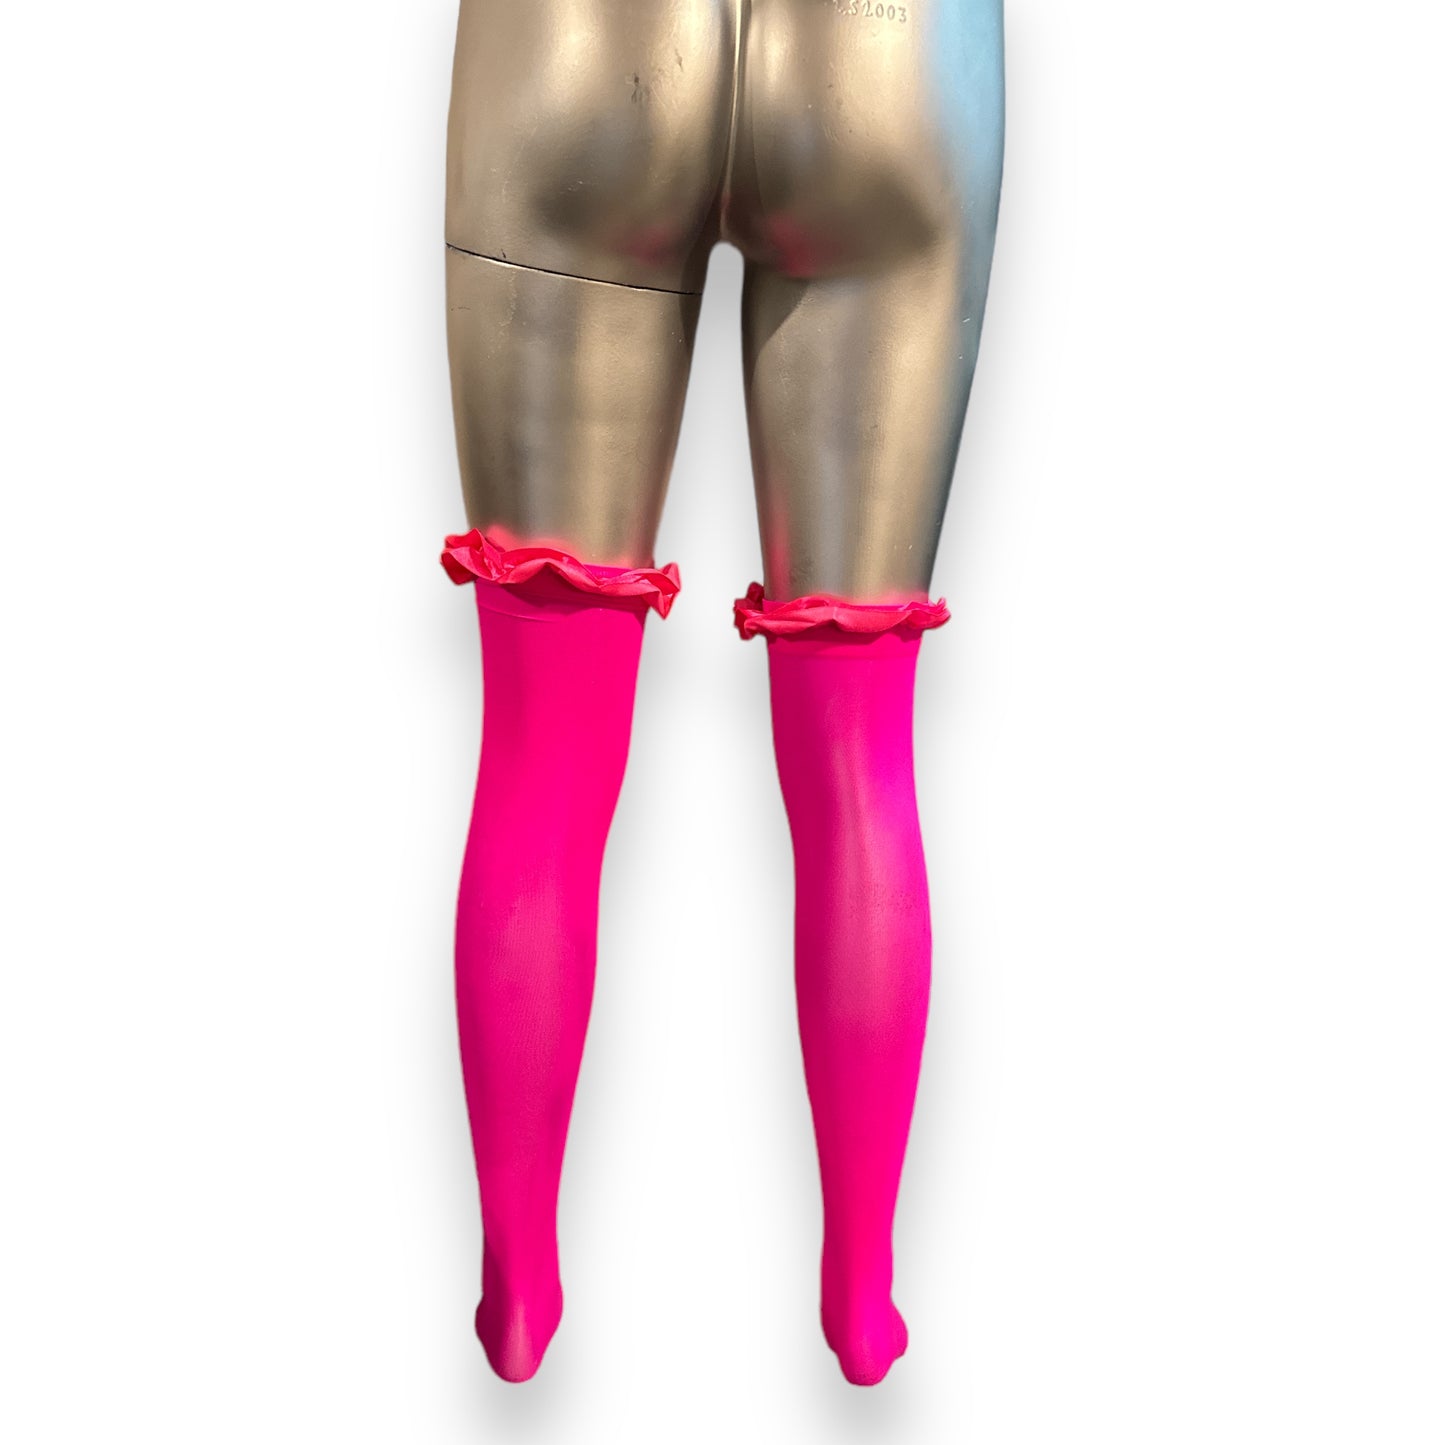 Kinky Pleasure - MP053 - Stockings In Neon Pink - Available in 2 Sizes